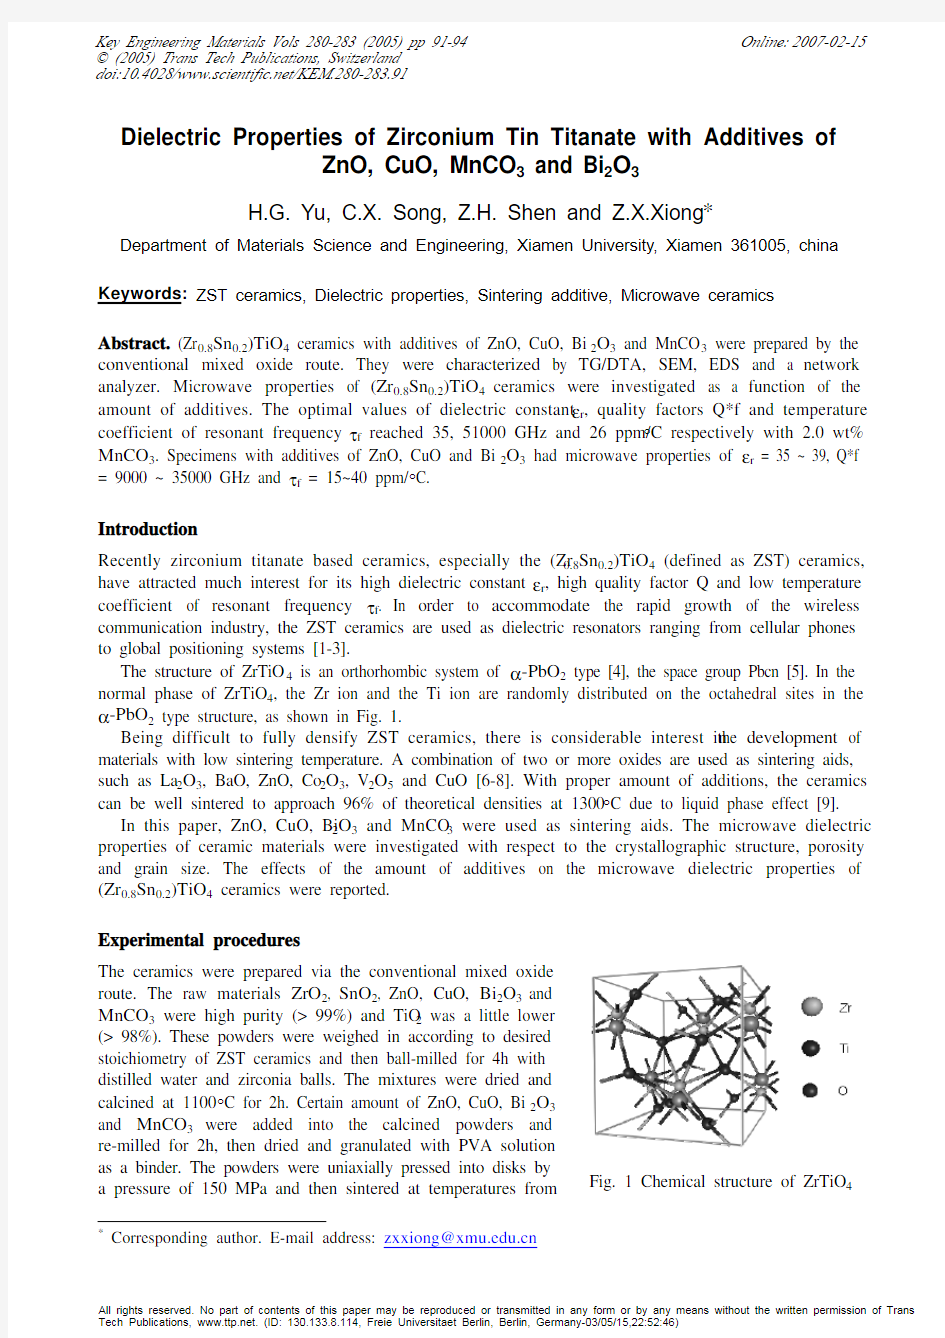 Dielectric Properties of Zirconium Tin Titanate with Additives of